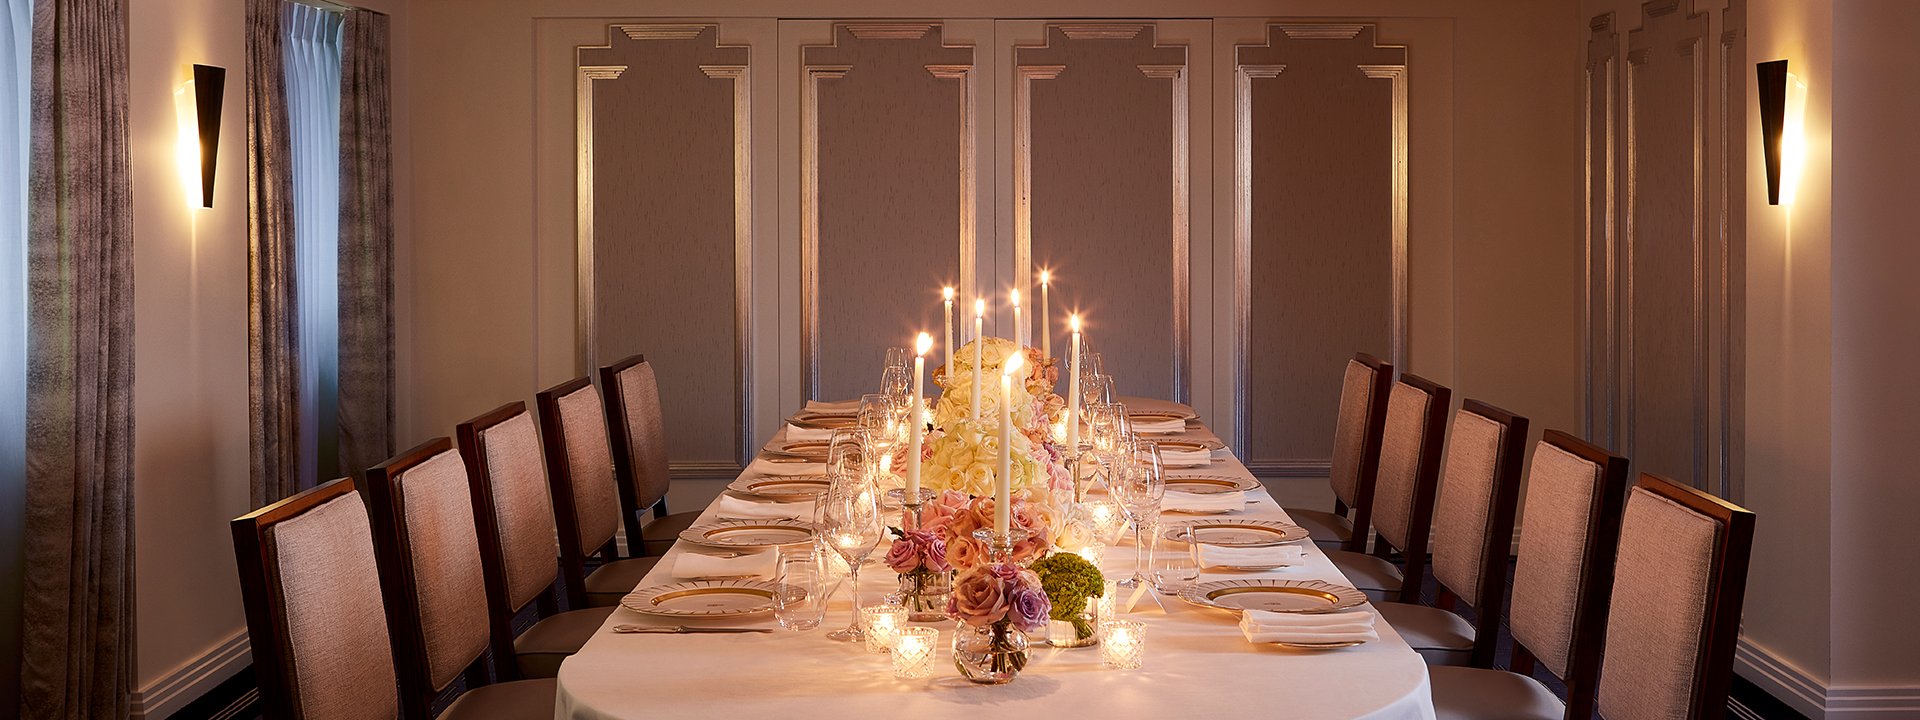 Highgrove room at Claridge's, with a table dressed with a white tablecloth, plates and some flowers.